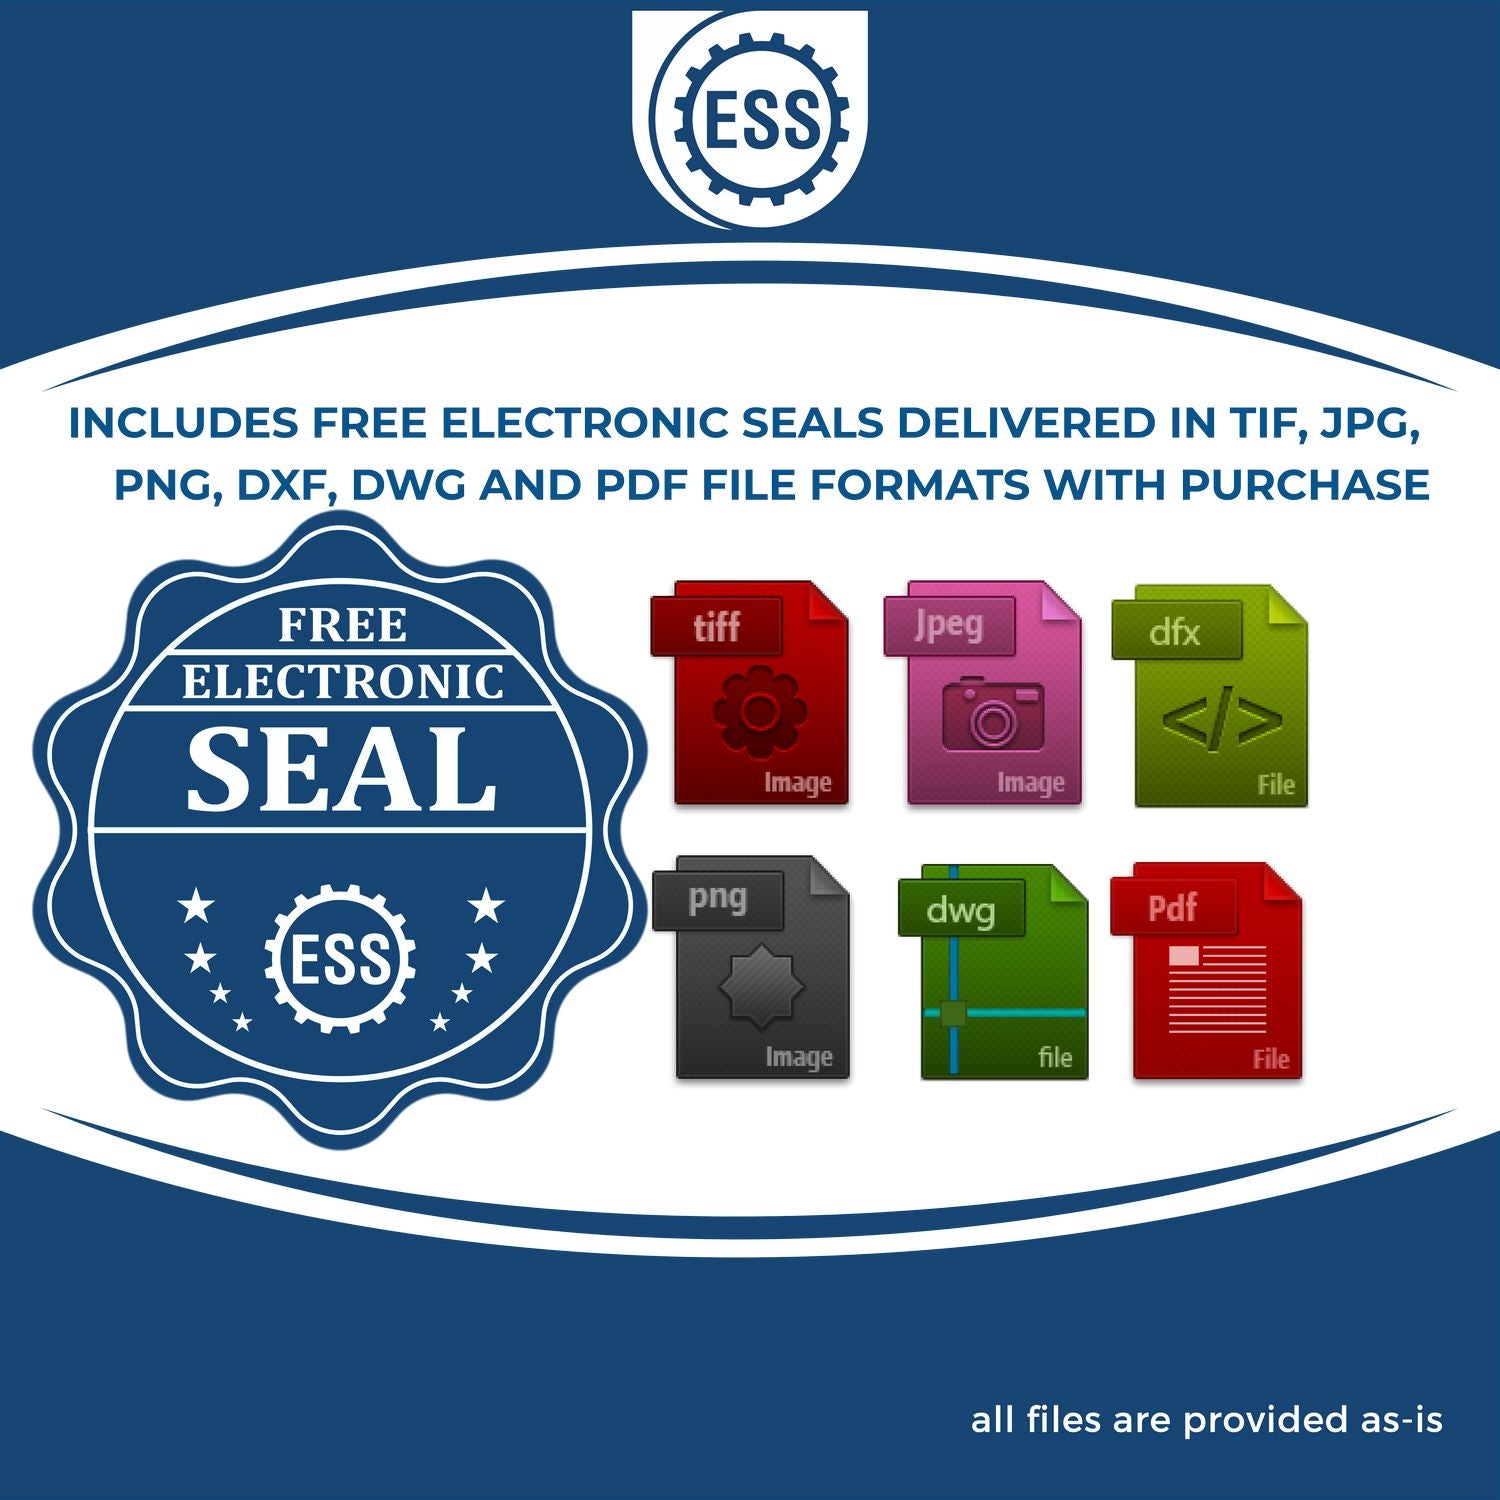 An infographic for the free electronic seal for the Oregon Professional Engineer Seal Stamp illustrating the different file type icons such as DXF, DWG, TIF, JPG and PNG.